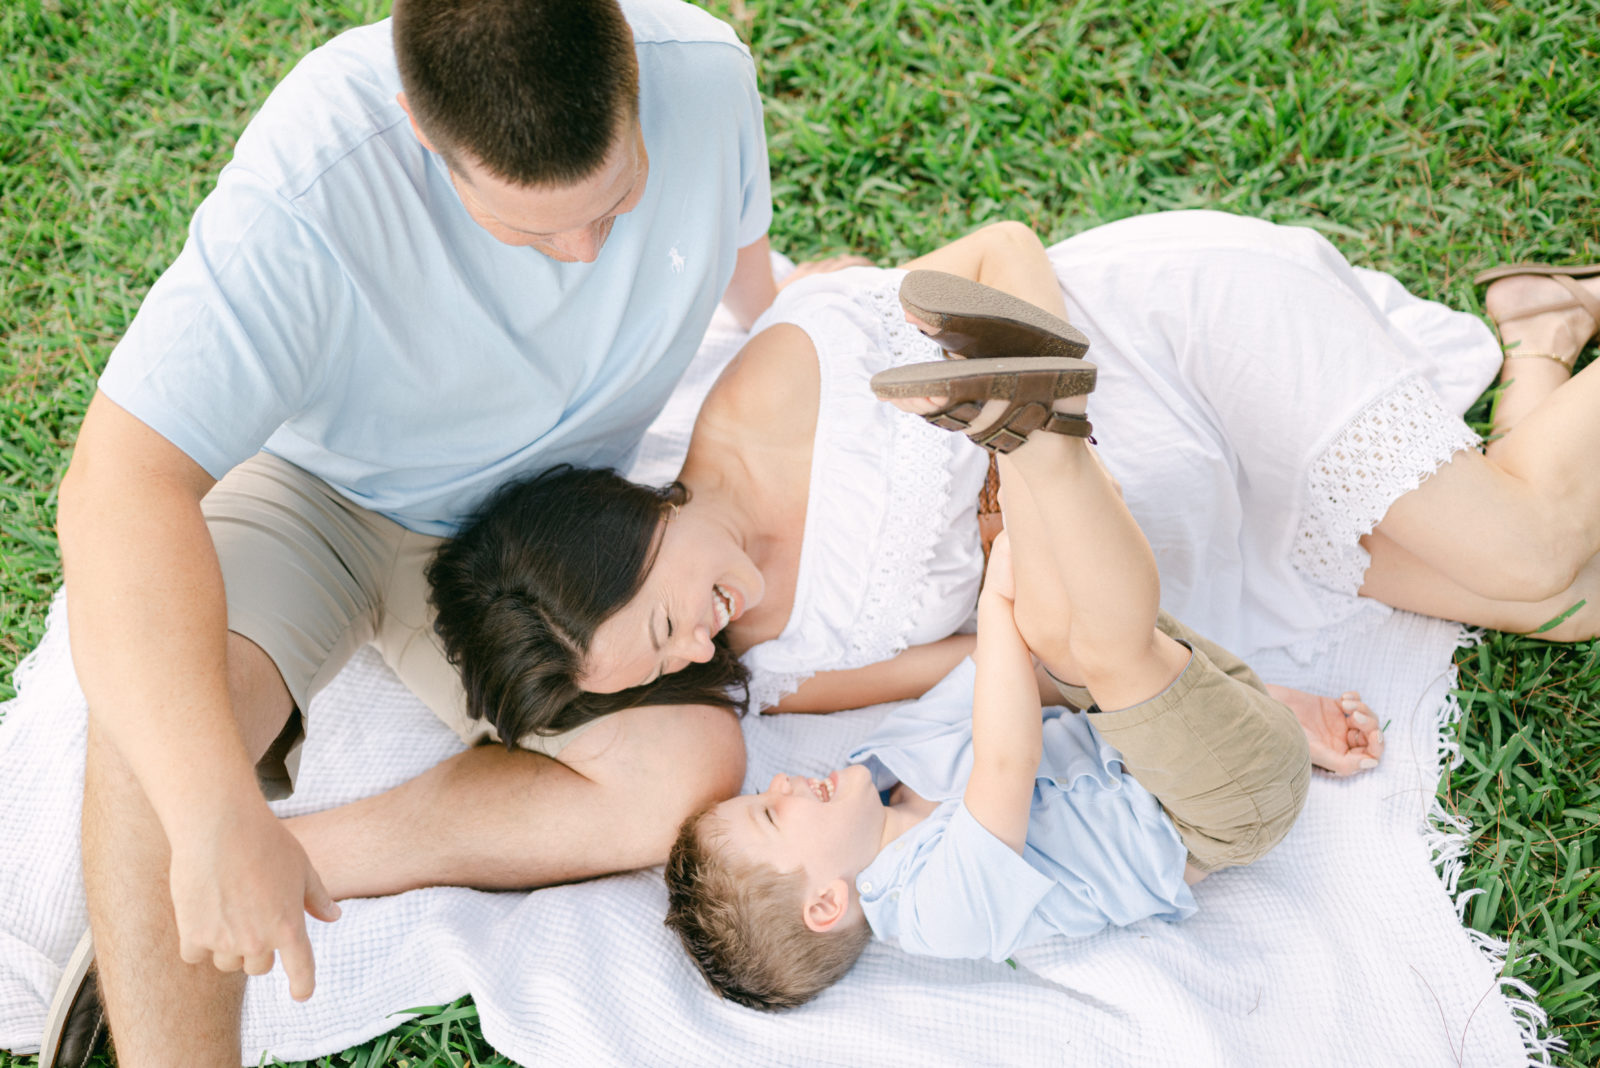 Family playing together on a blanket in a park